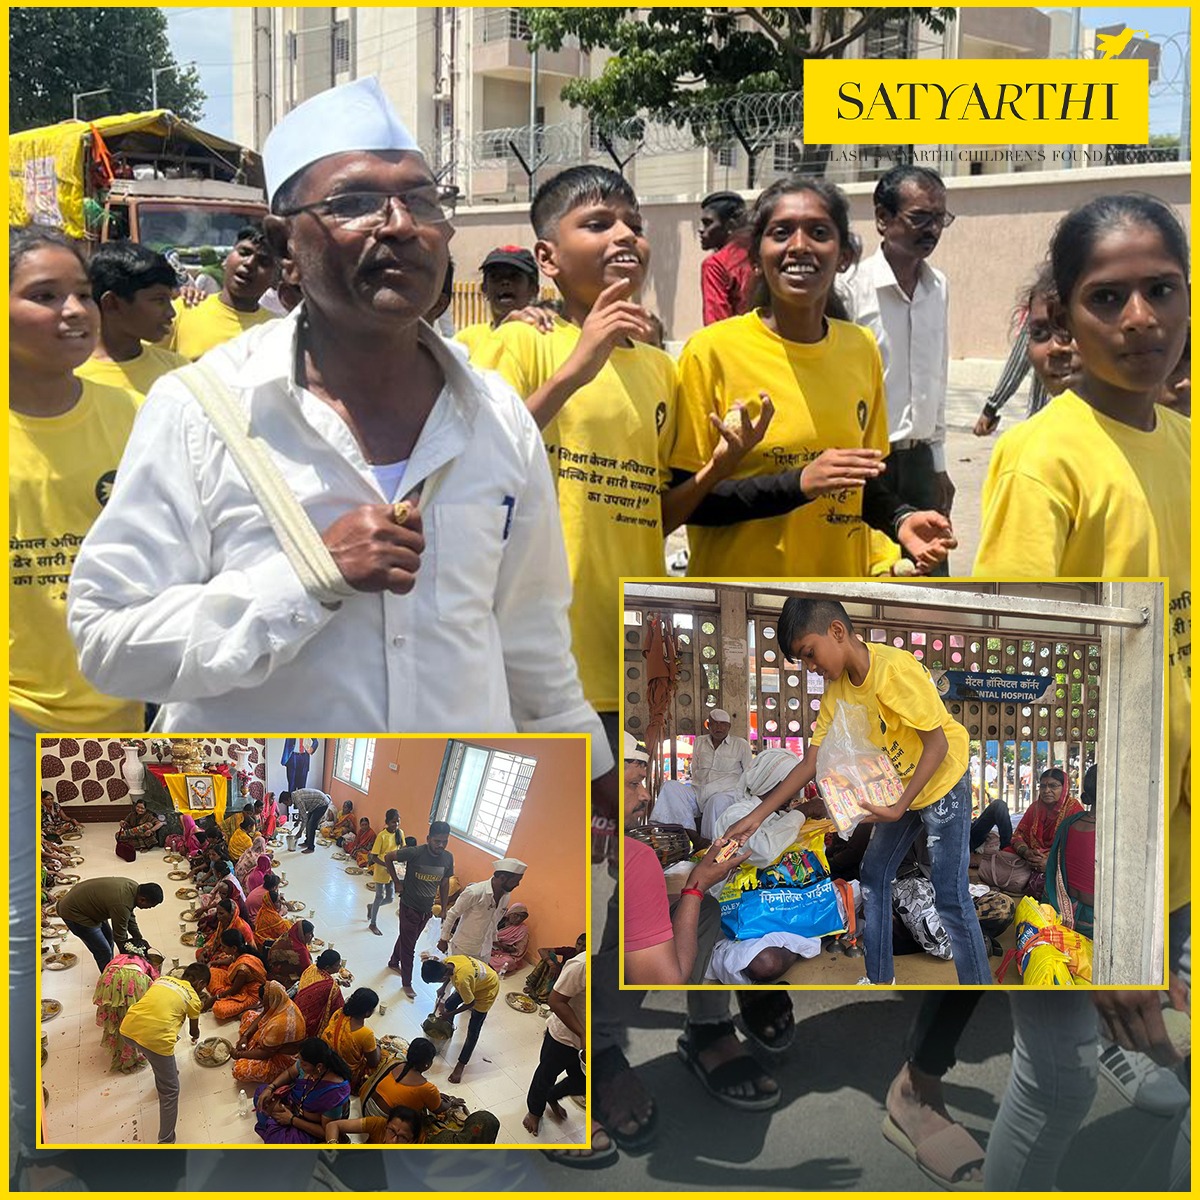 SEVA is the biggest form of service. In the spirit of seva, the children of #BalMitraMandal, #Pune, selflessly served and supported the #Warkaris during #PayiDindiWari, spreading joy and advocating for children's rights.
 
@games24x7

#BMM #balmitramandal